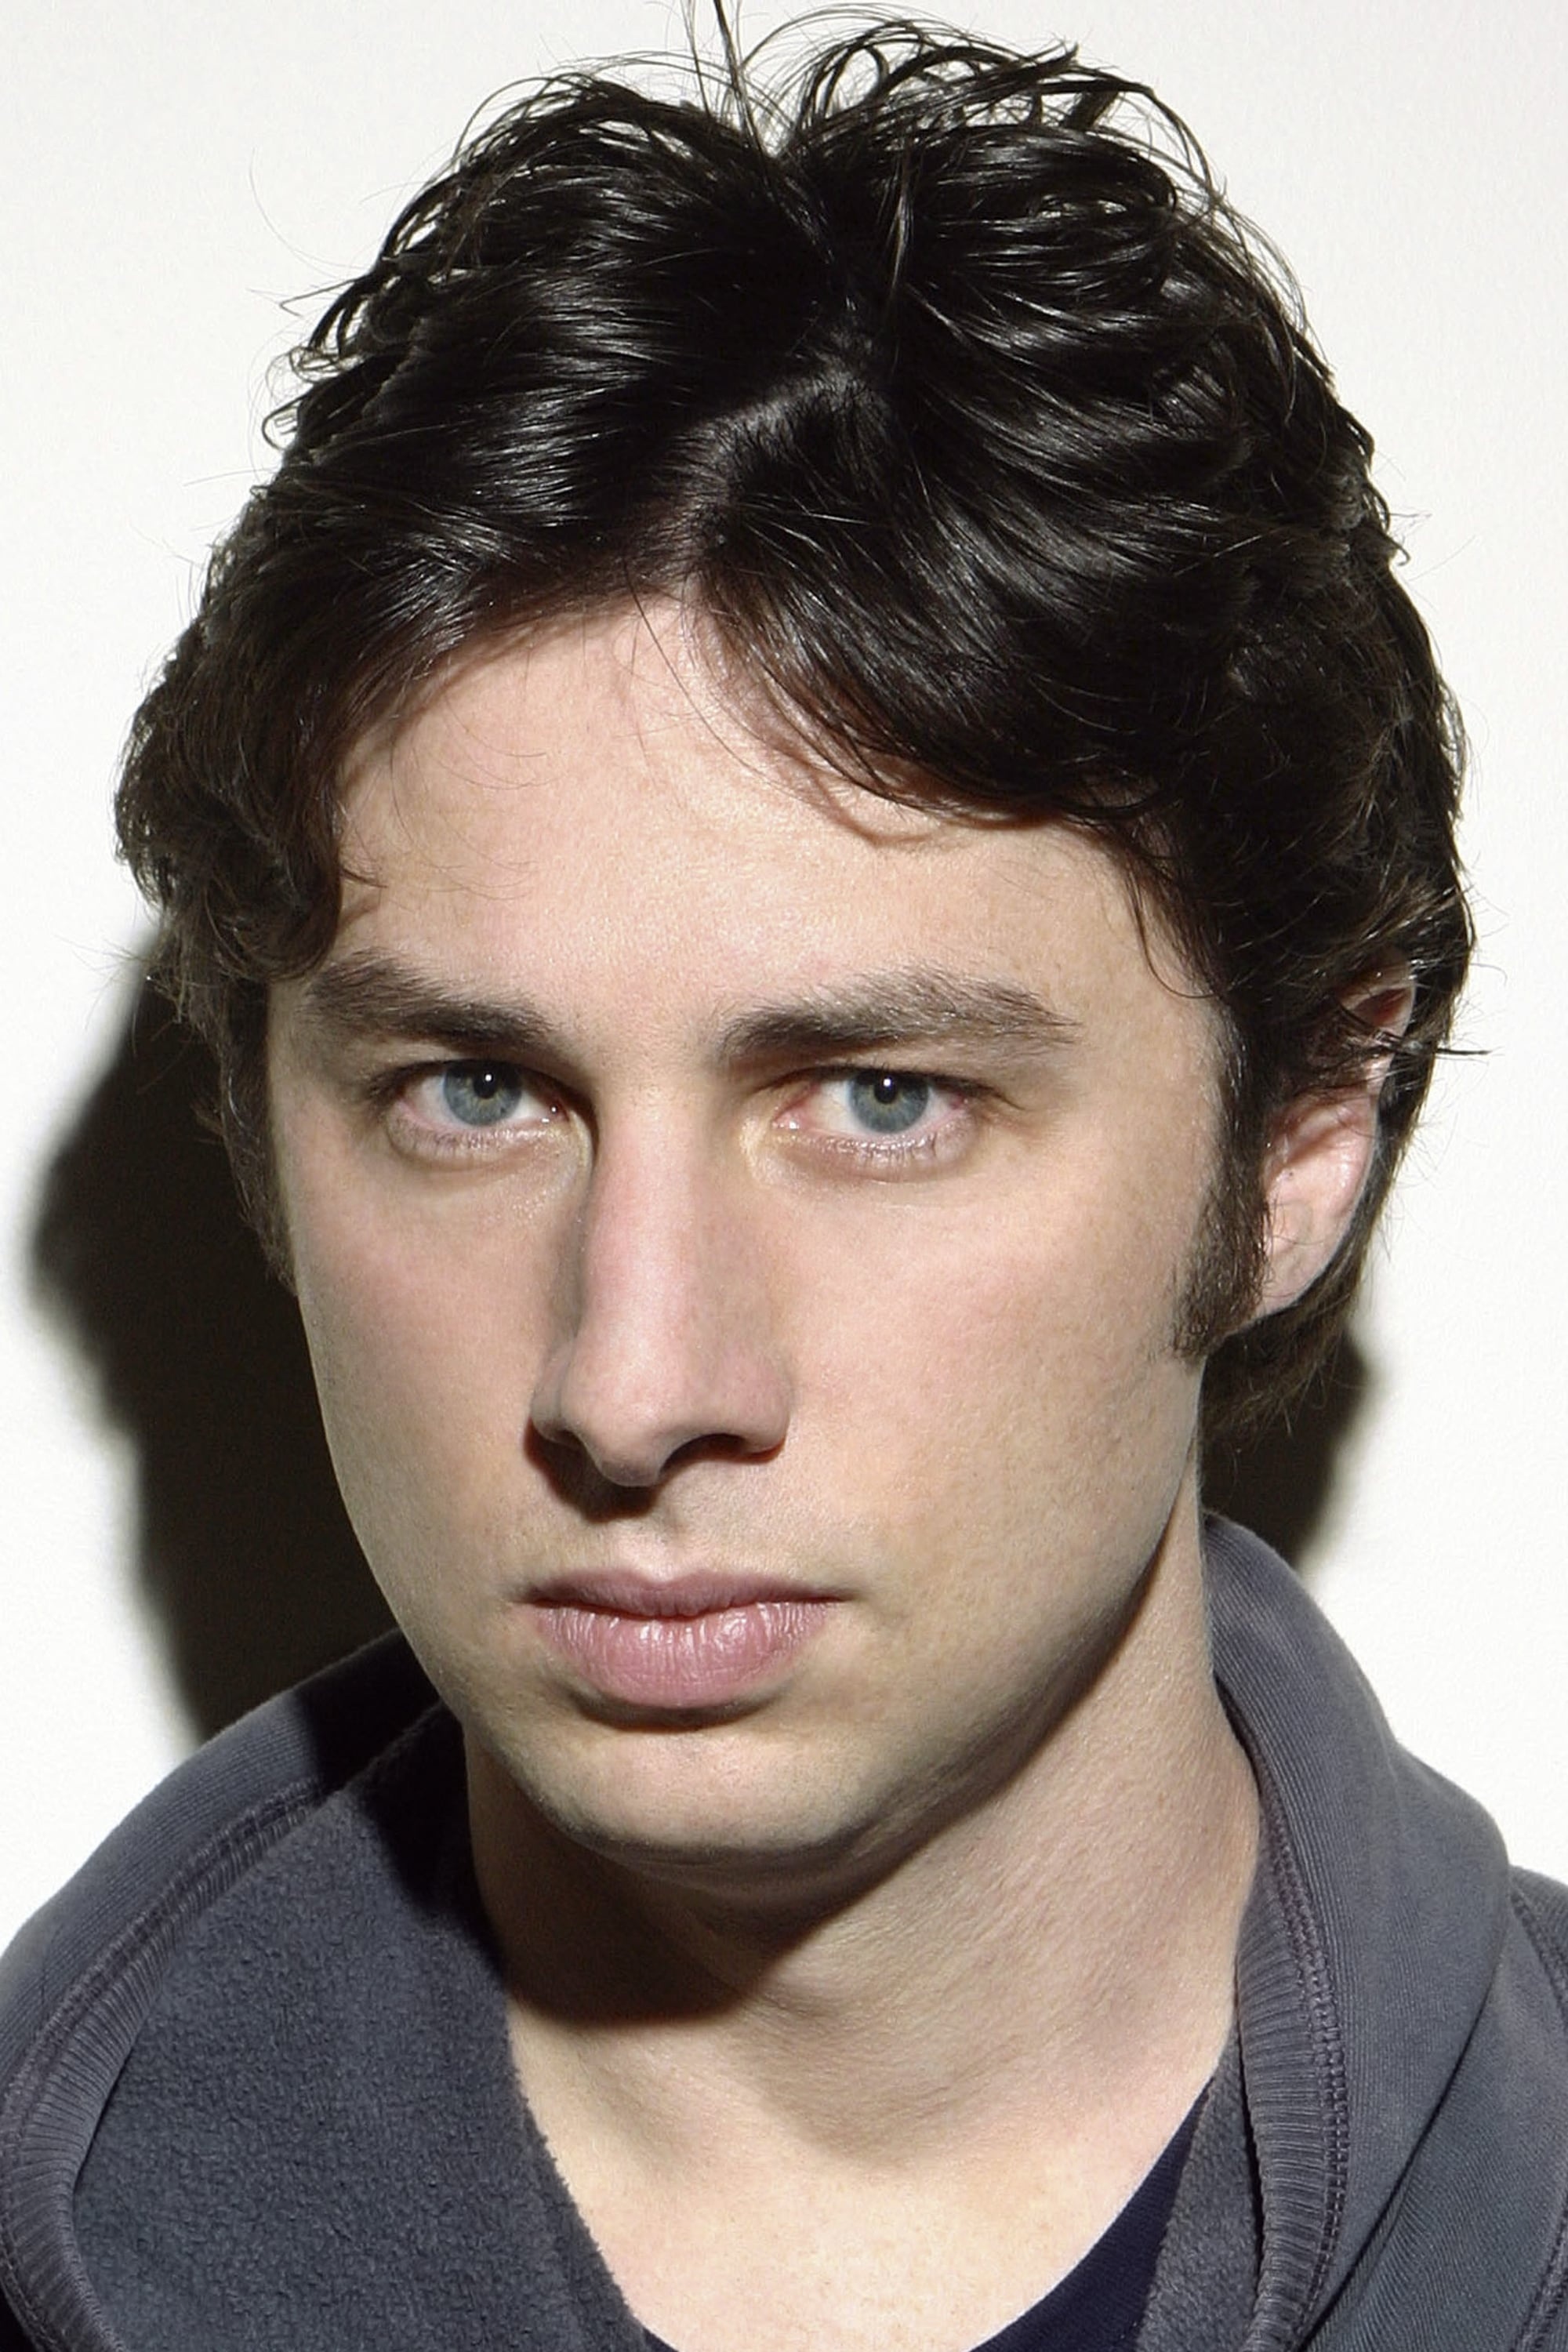 Zach Braff: Wrote the screenplay, directed, and compiled the soundtrack album of the 2004 film Garden State. 2000x3000 HD Background.